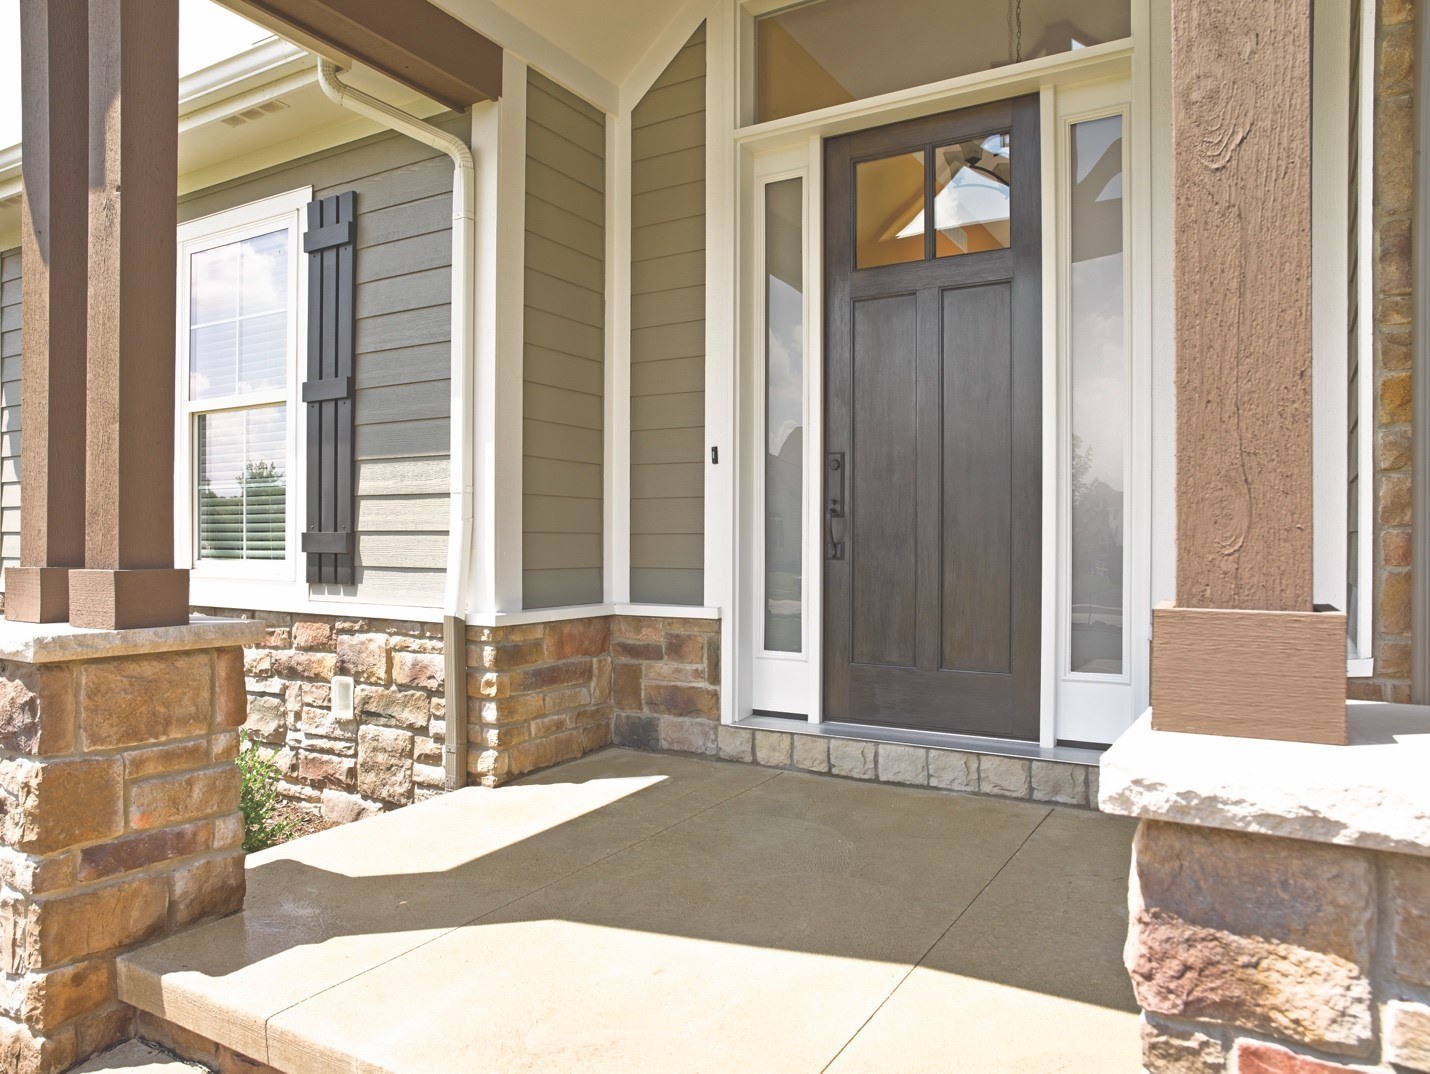 The entrance to a home with stacked-stone foundation details and an energy-efficient front door